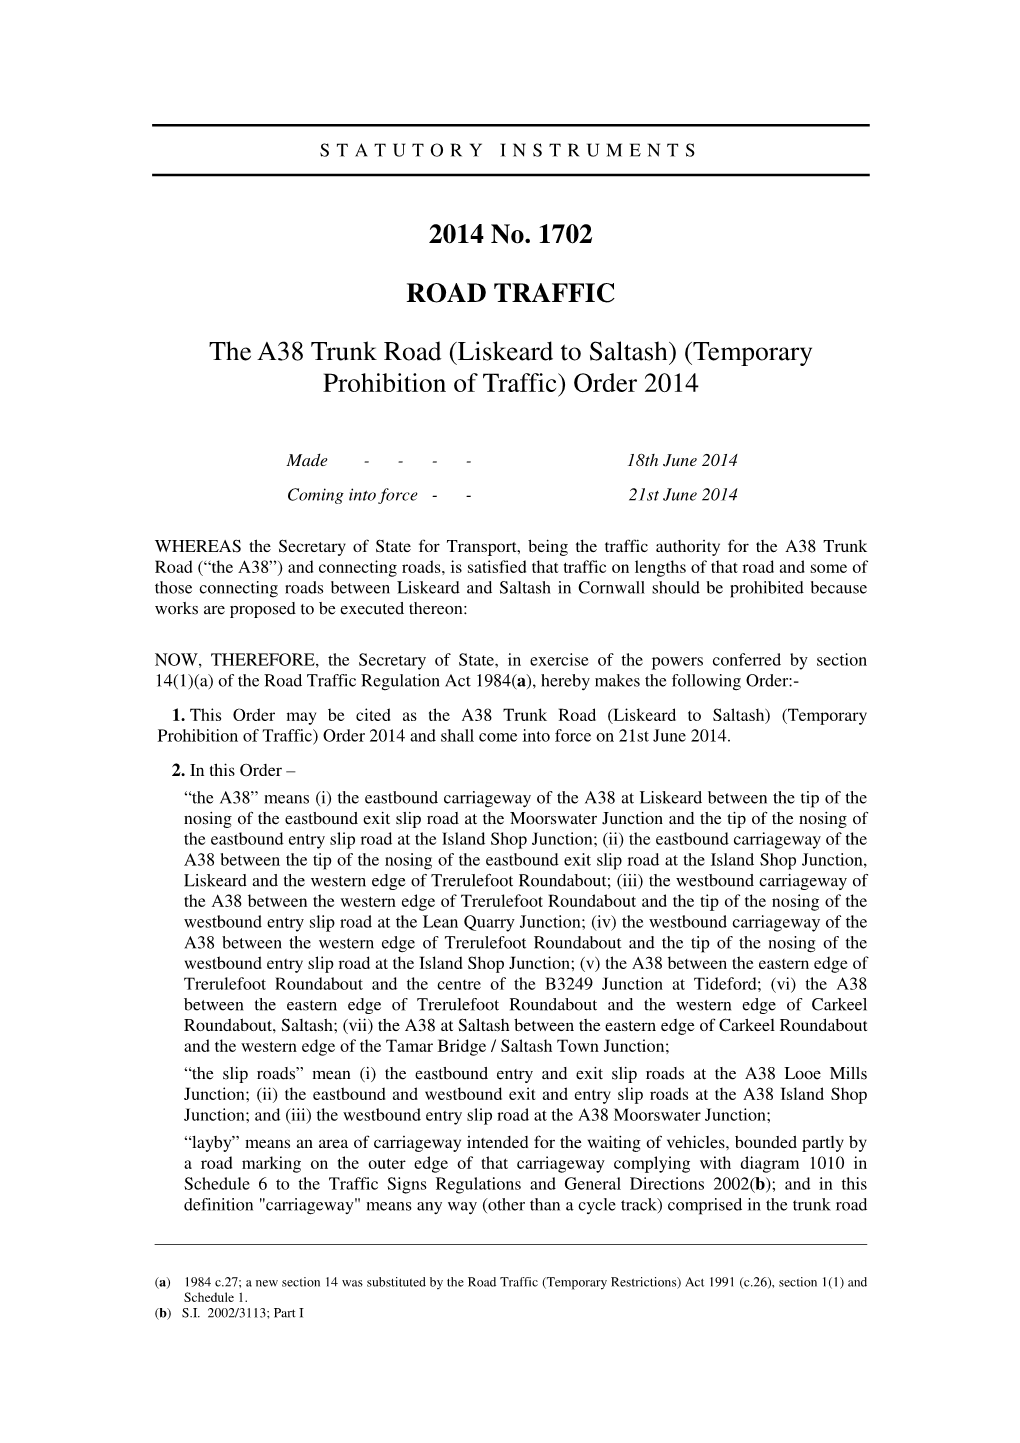 The A38 Trunk Road (Liskeard to Saltash) (Temporary Prohibition of Traffic) Order 2014